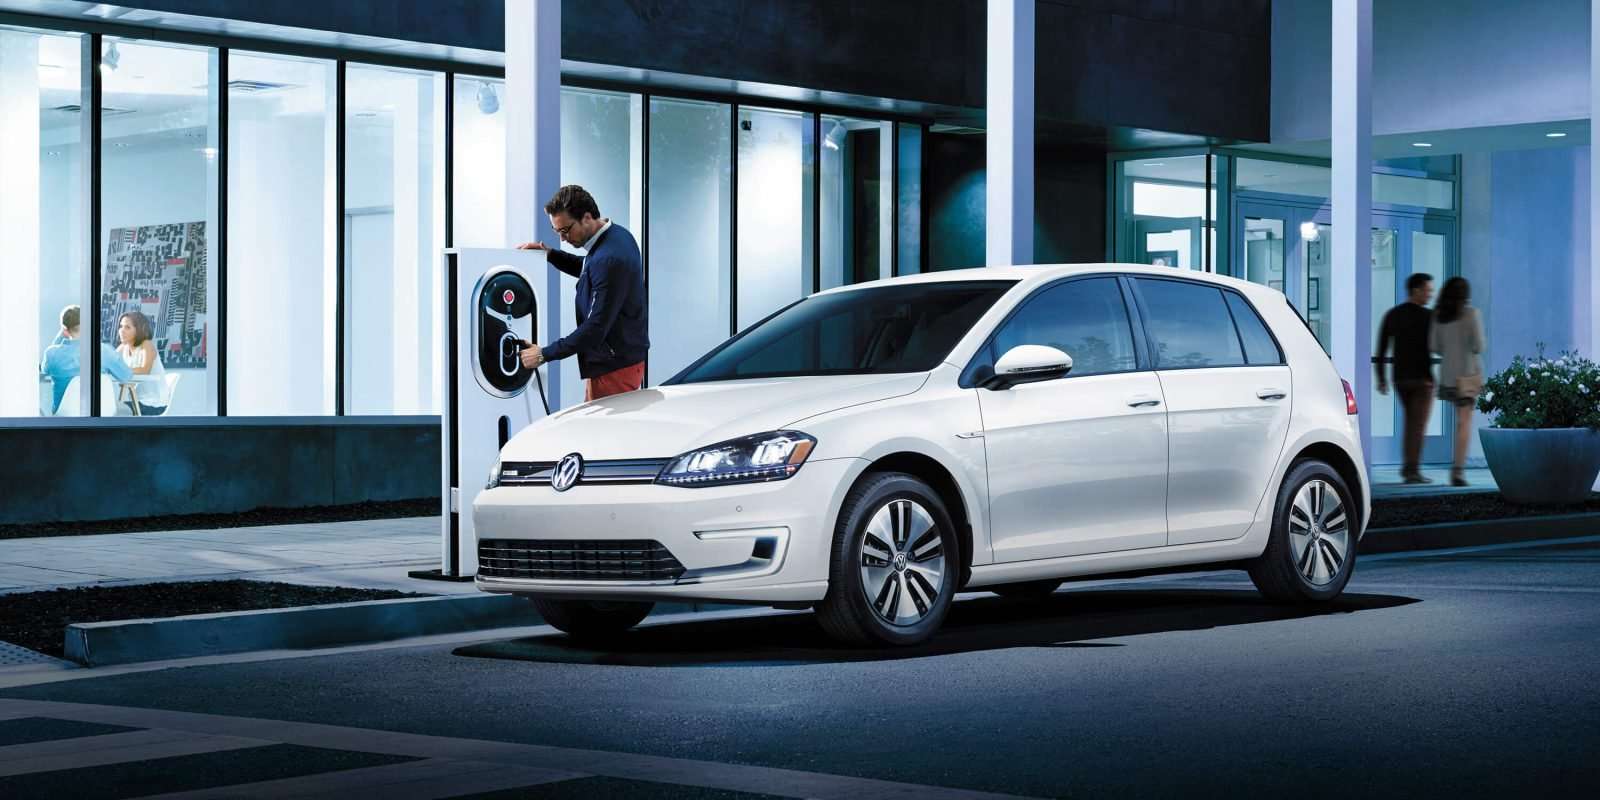 image for VW to build a ‘nationwide 150 kW+ fast charging network’ for electric vehicles as part of Dieselgate settlement